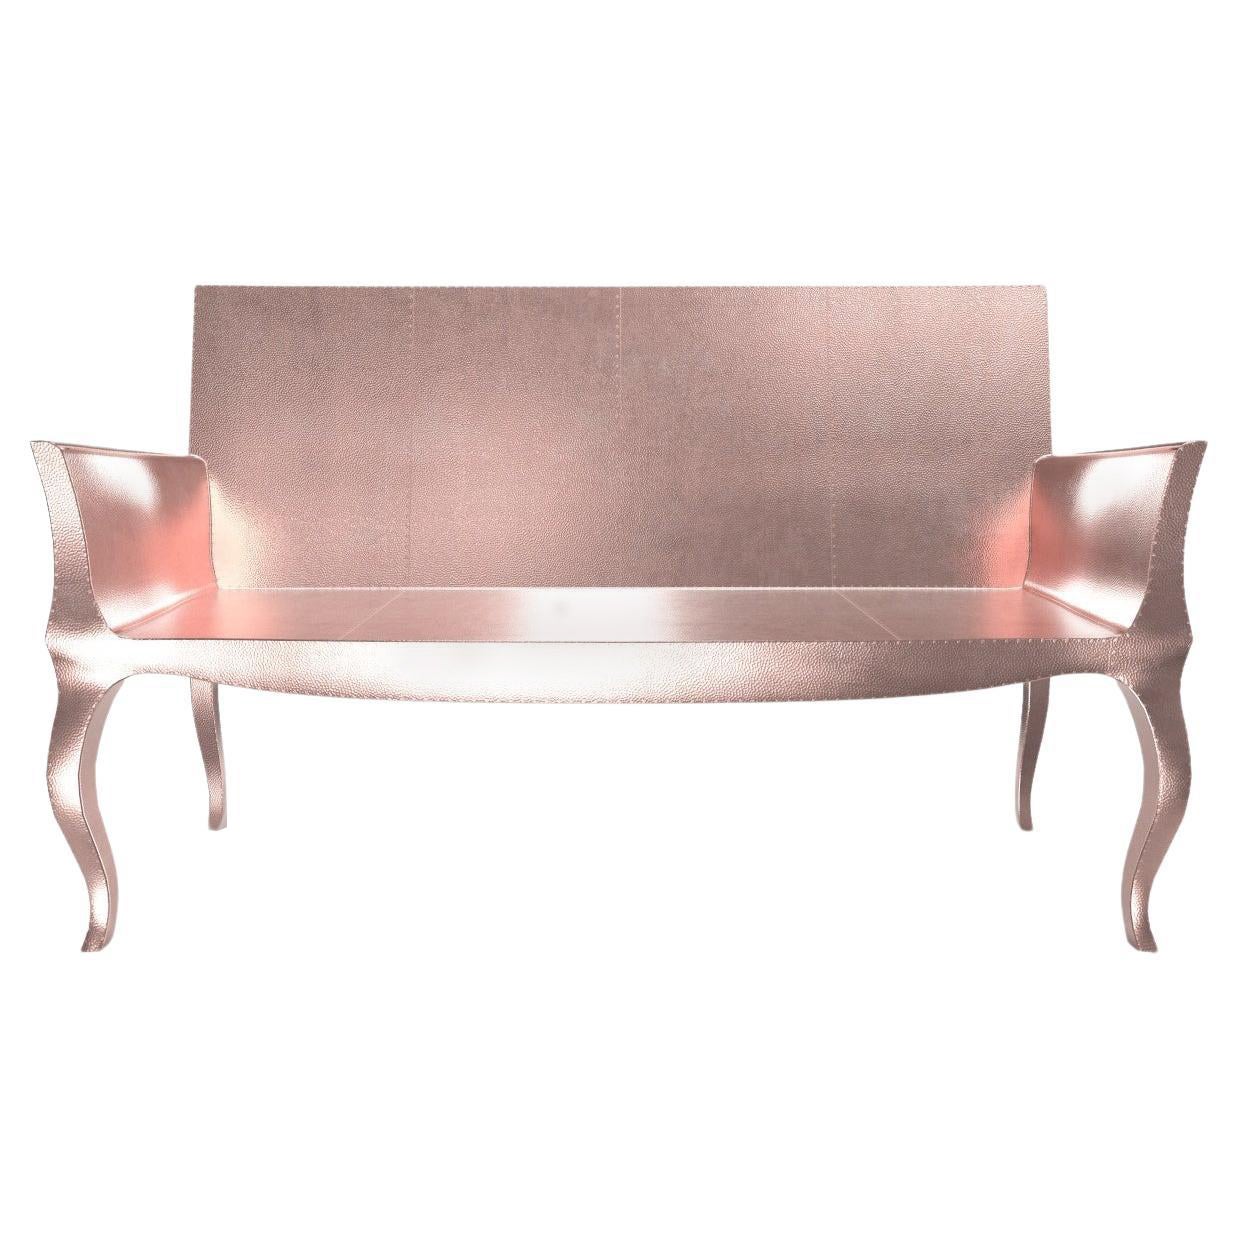 Louise Settee Art Deco Lounge Chairs in Mid. Hammered Copper by Paul Mathieu For Sale